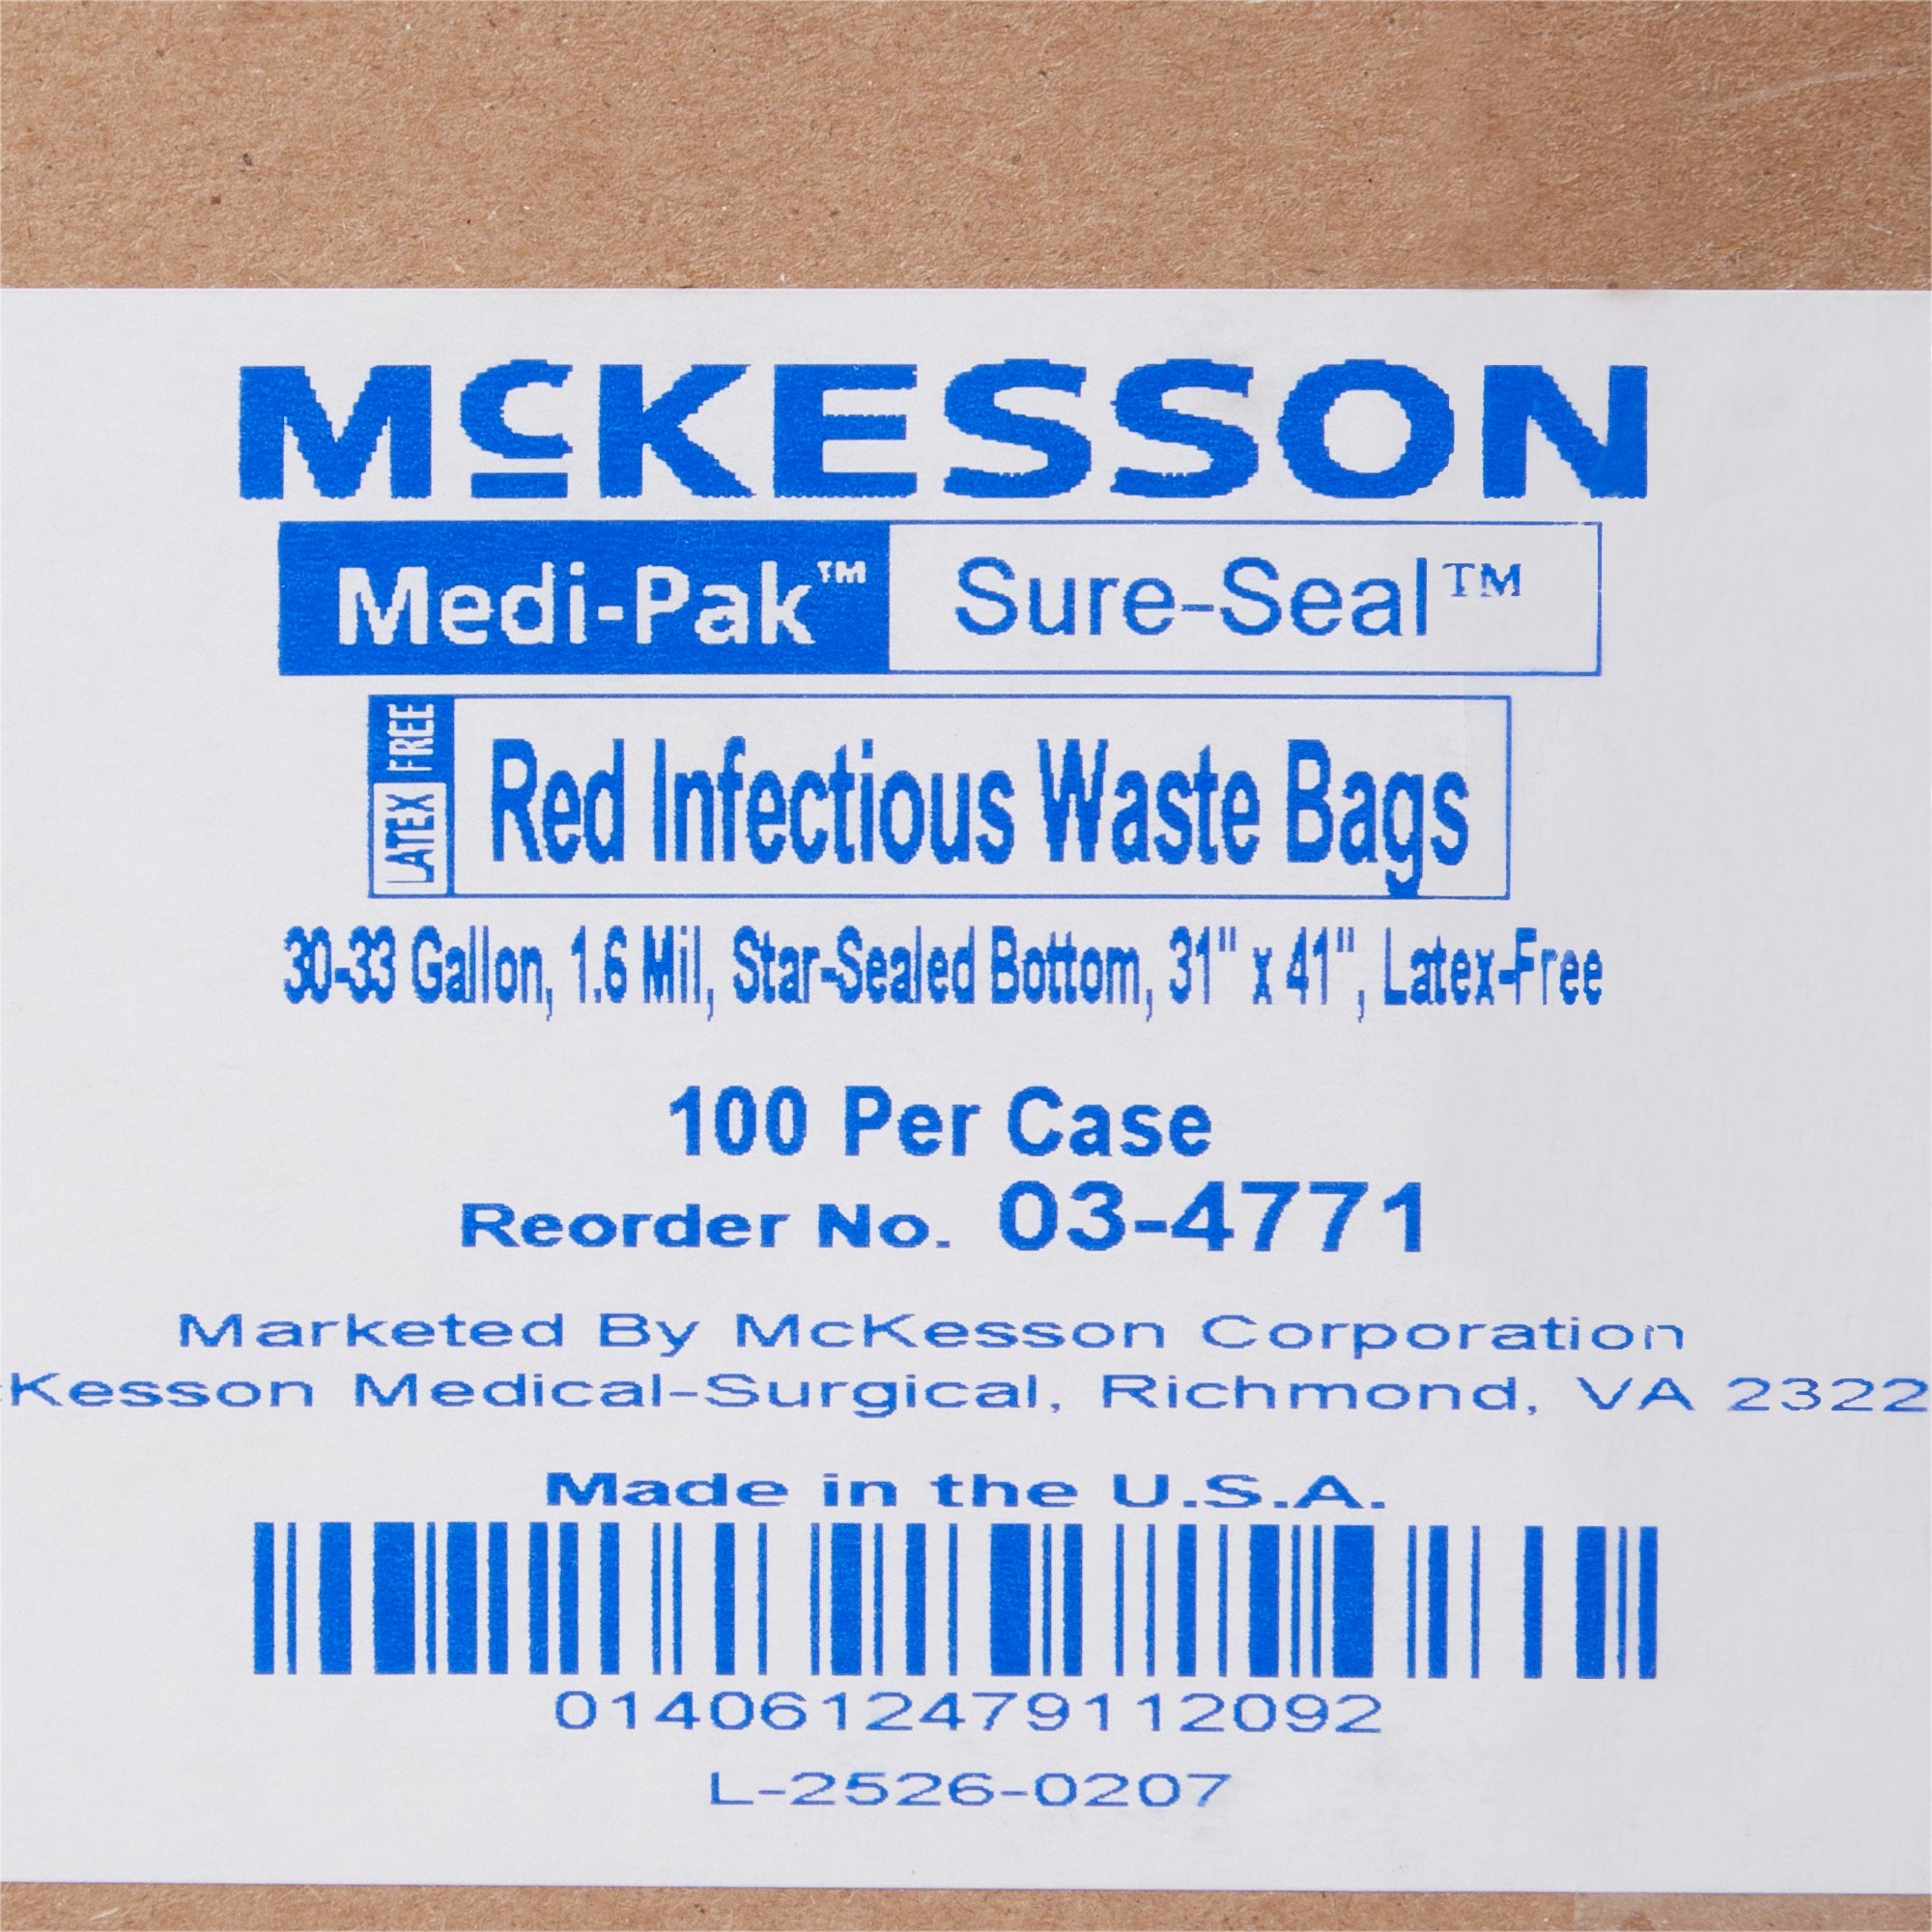 Infectious Waste Bag McKesson 30 to 33 gal. Red Bag LLDPE 31 X 41 Inch